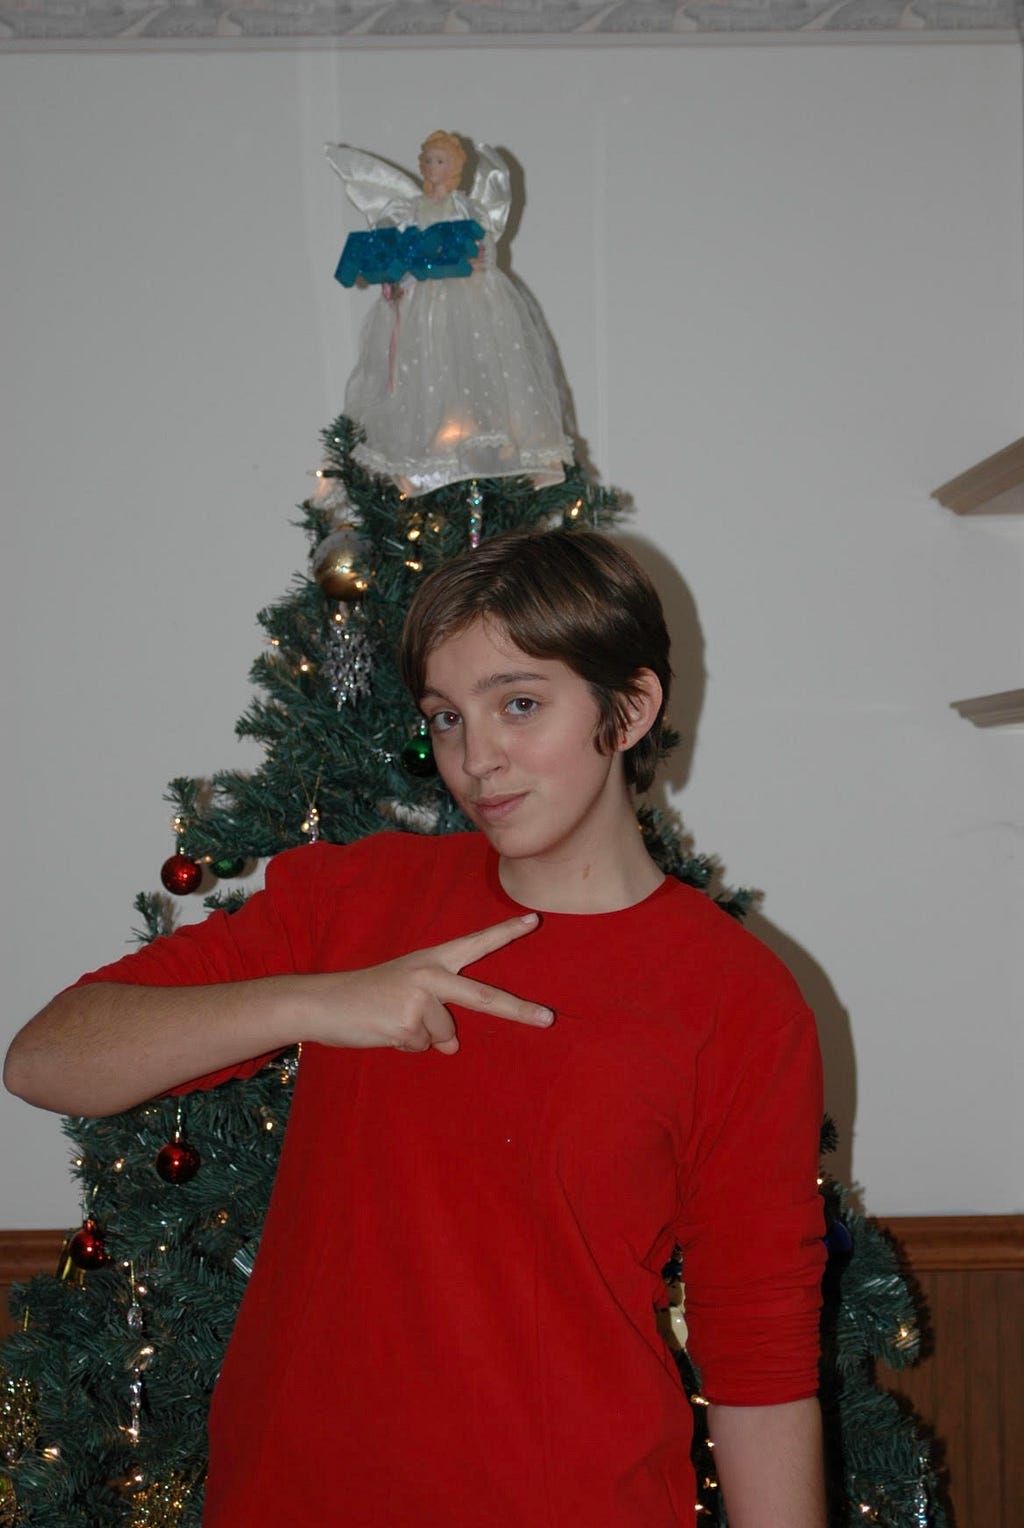 A white female teenager of around fourteen looks into the camera while making a peace sign with her hands. She is wearing a red, long-sleeved shirt with the sleeves pushed up and there is a Christmas tree with an angel holding a sign which says “PEACE” in the background. The teenager has short brown hair.